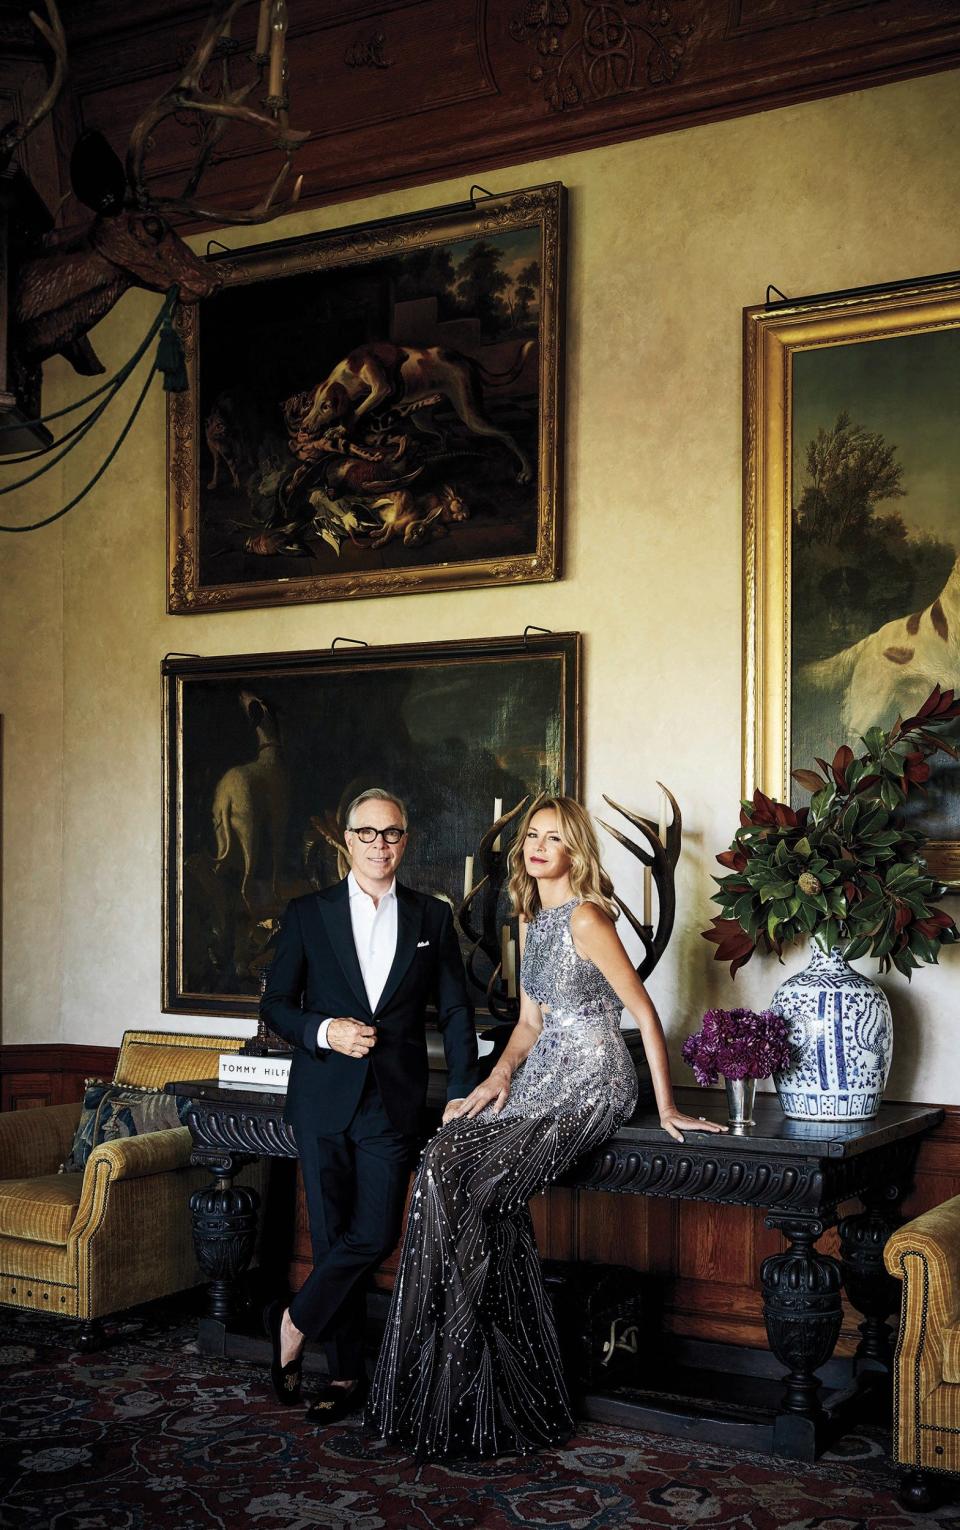 Tommy Hilfiger and his wife Dee